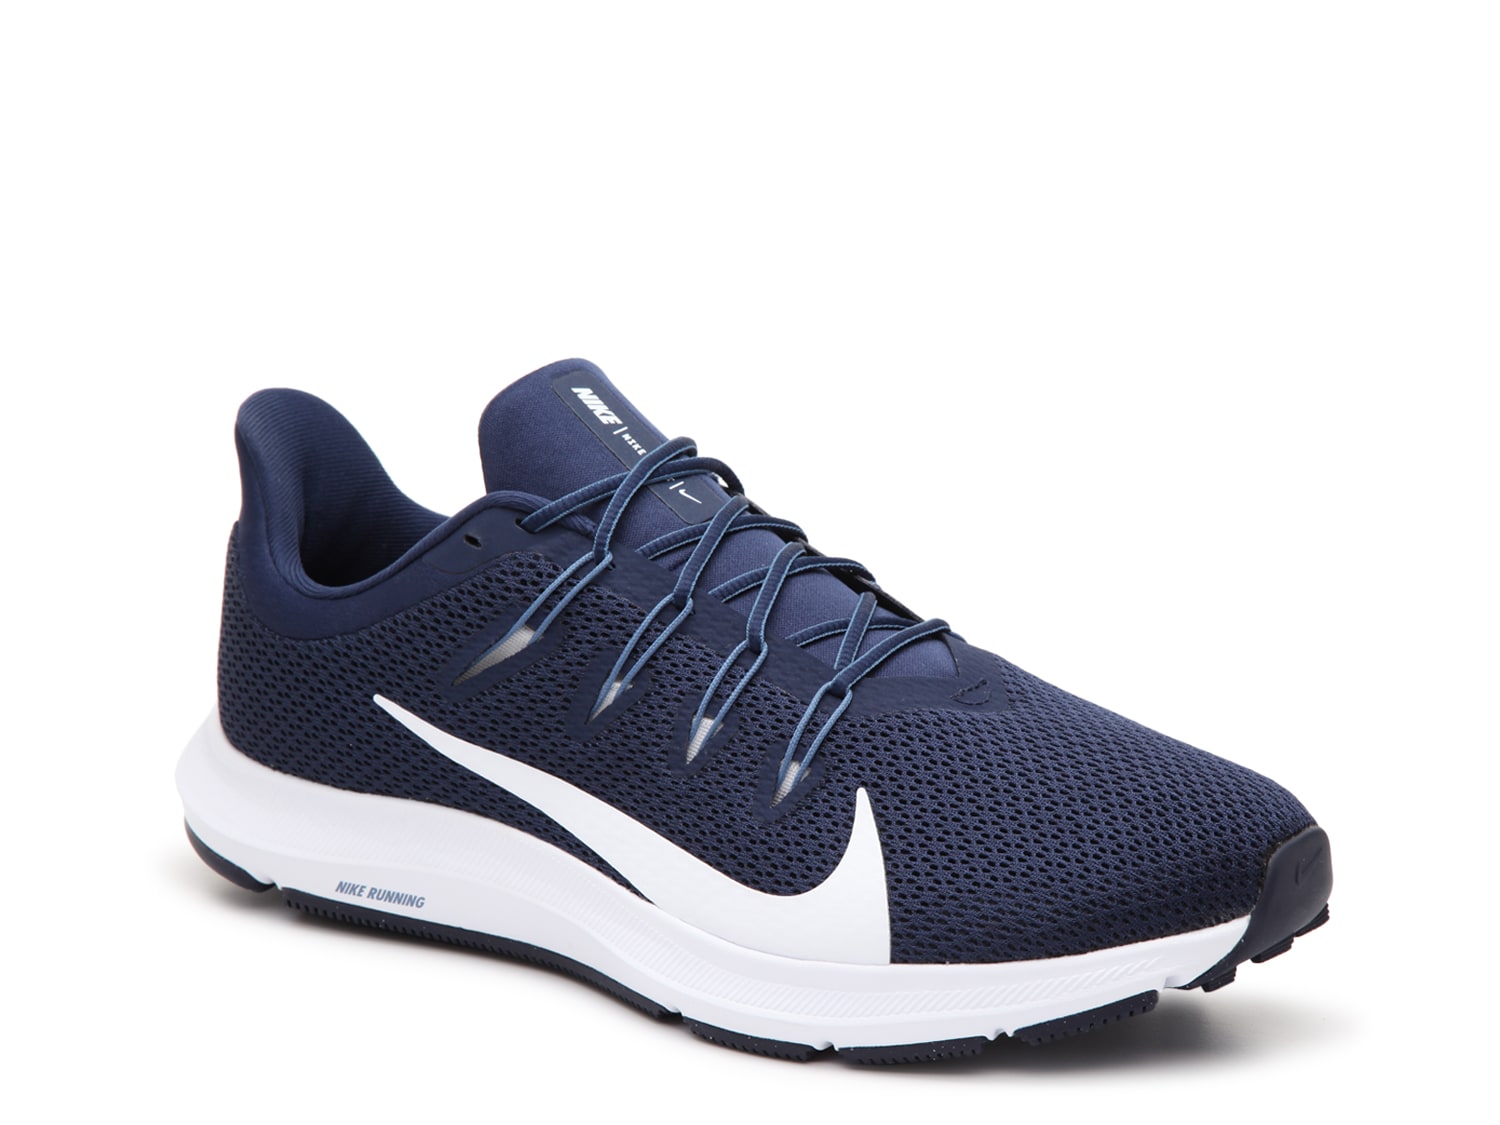 nike quest 2 men's running shoes